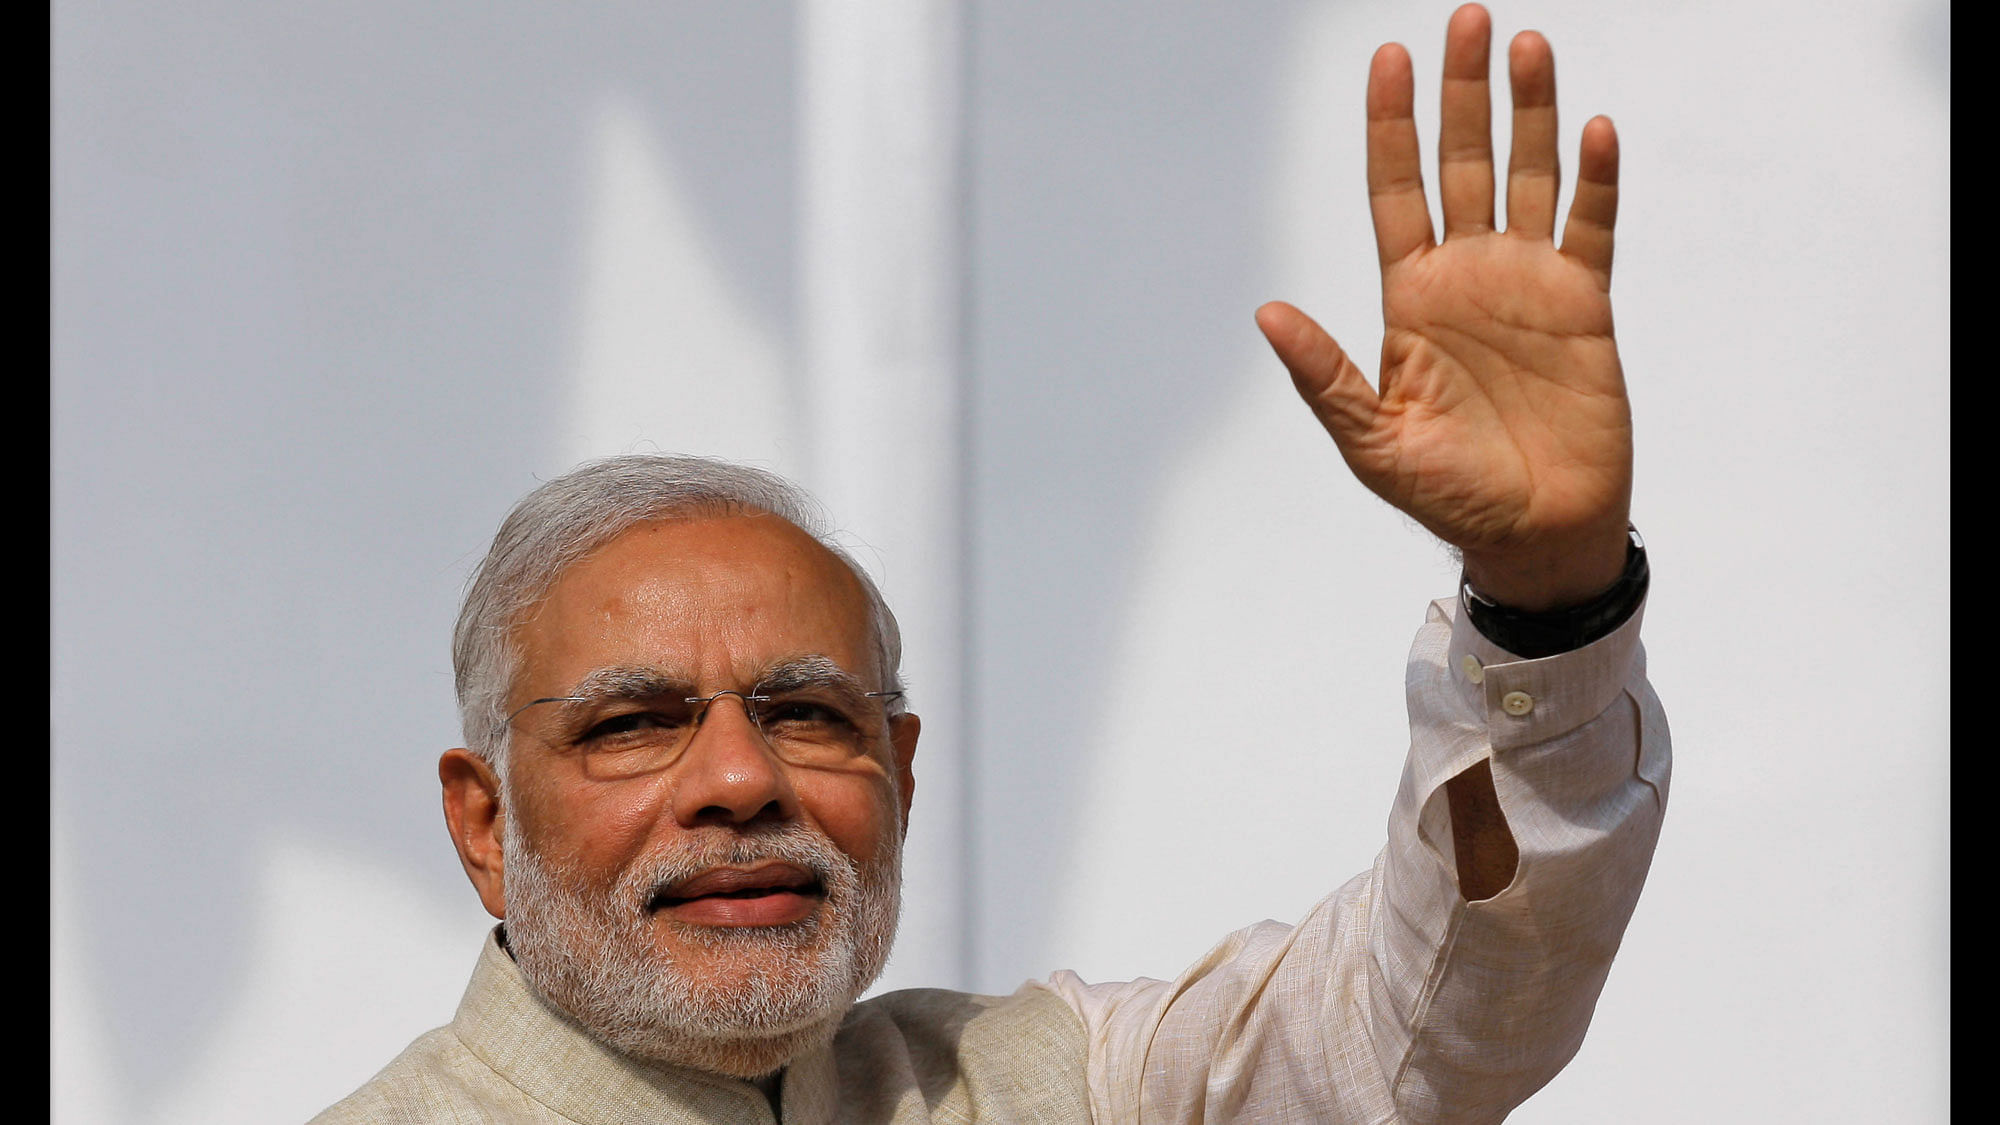 Prime Minister Narendra Modi hopes to better connect with people through Mann Ki Baat streaming on Saavn. (Photo: AP)